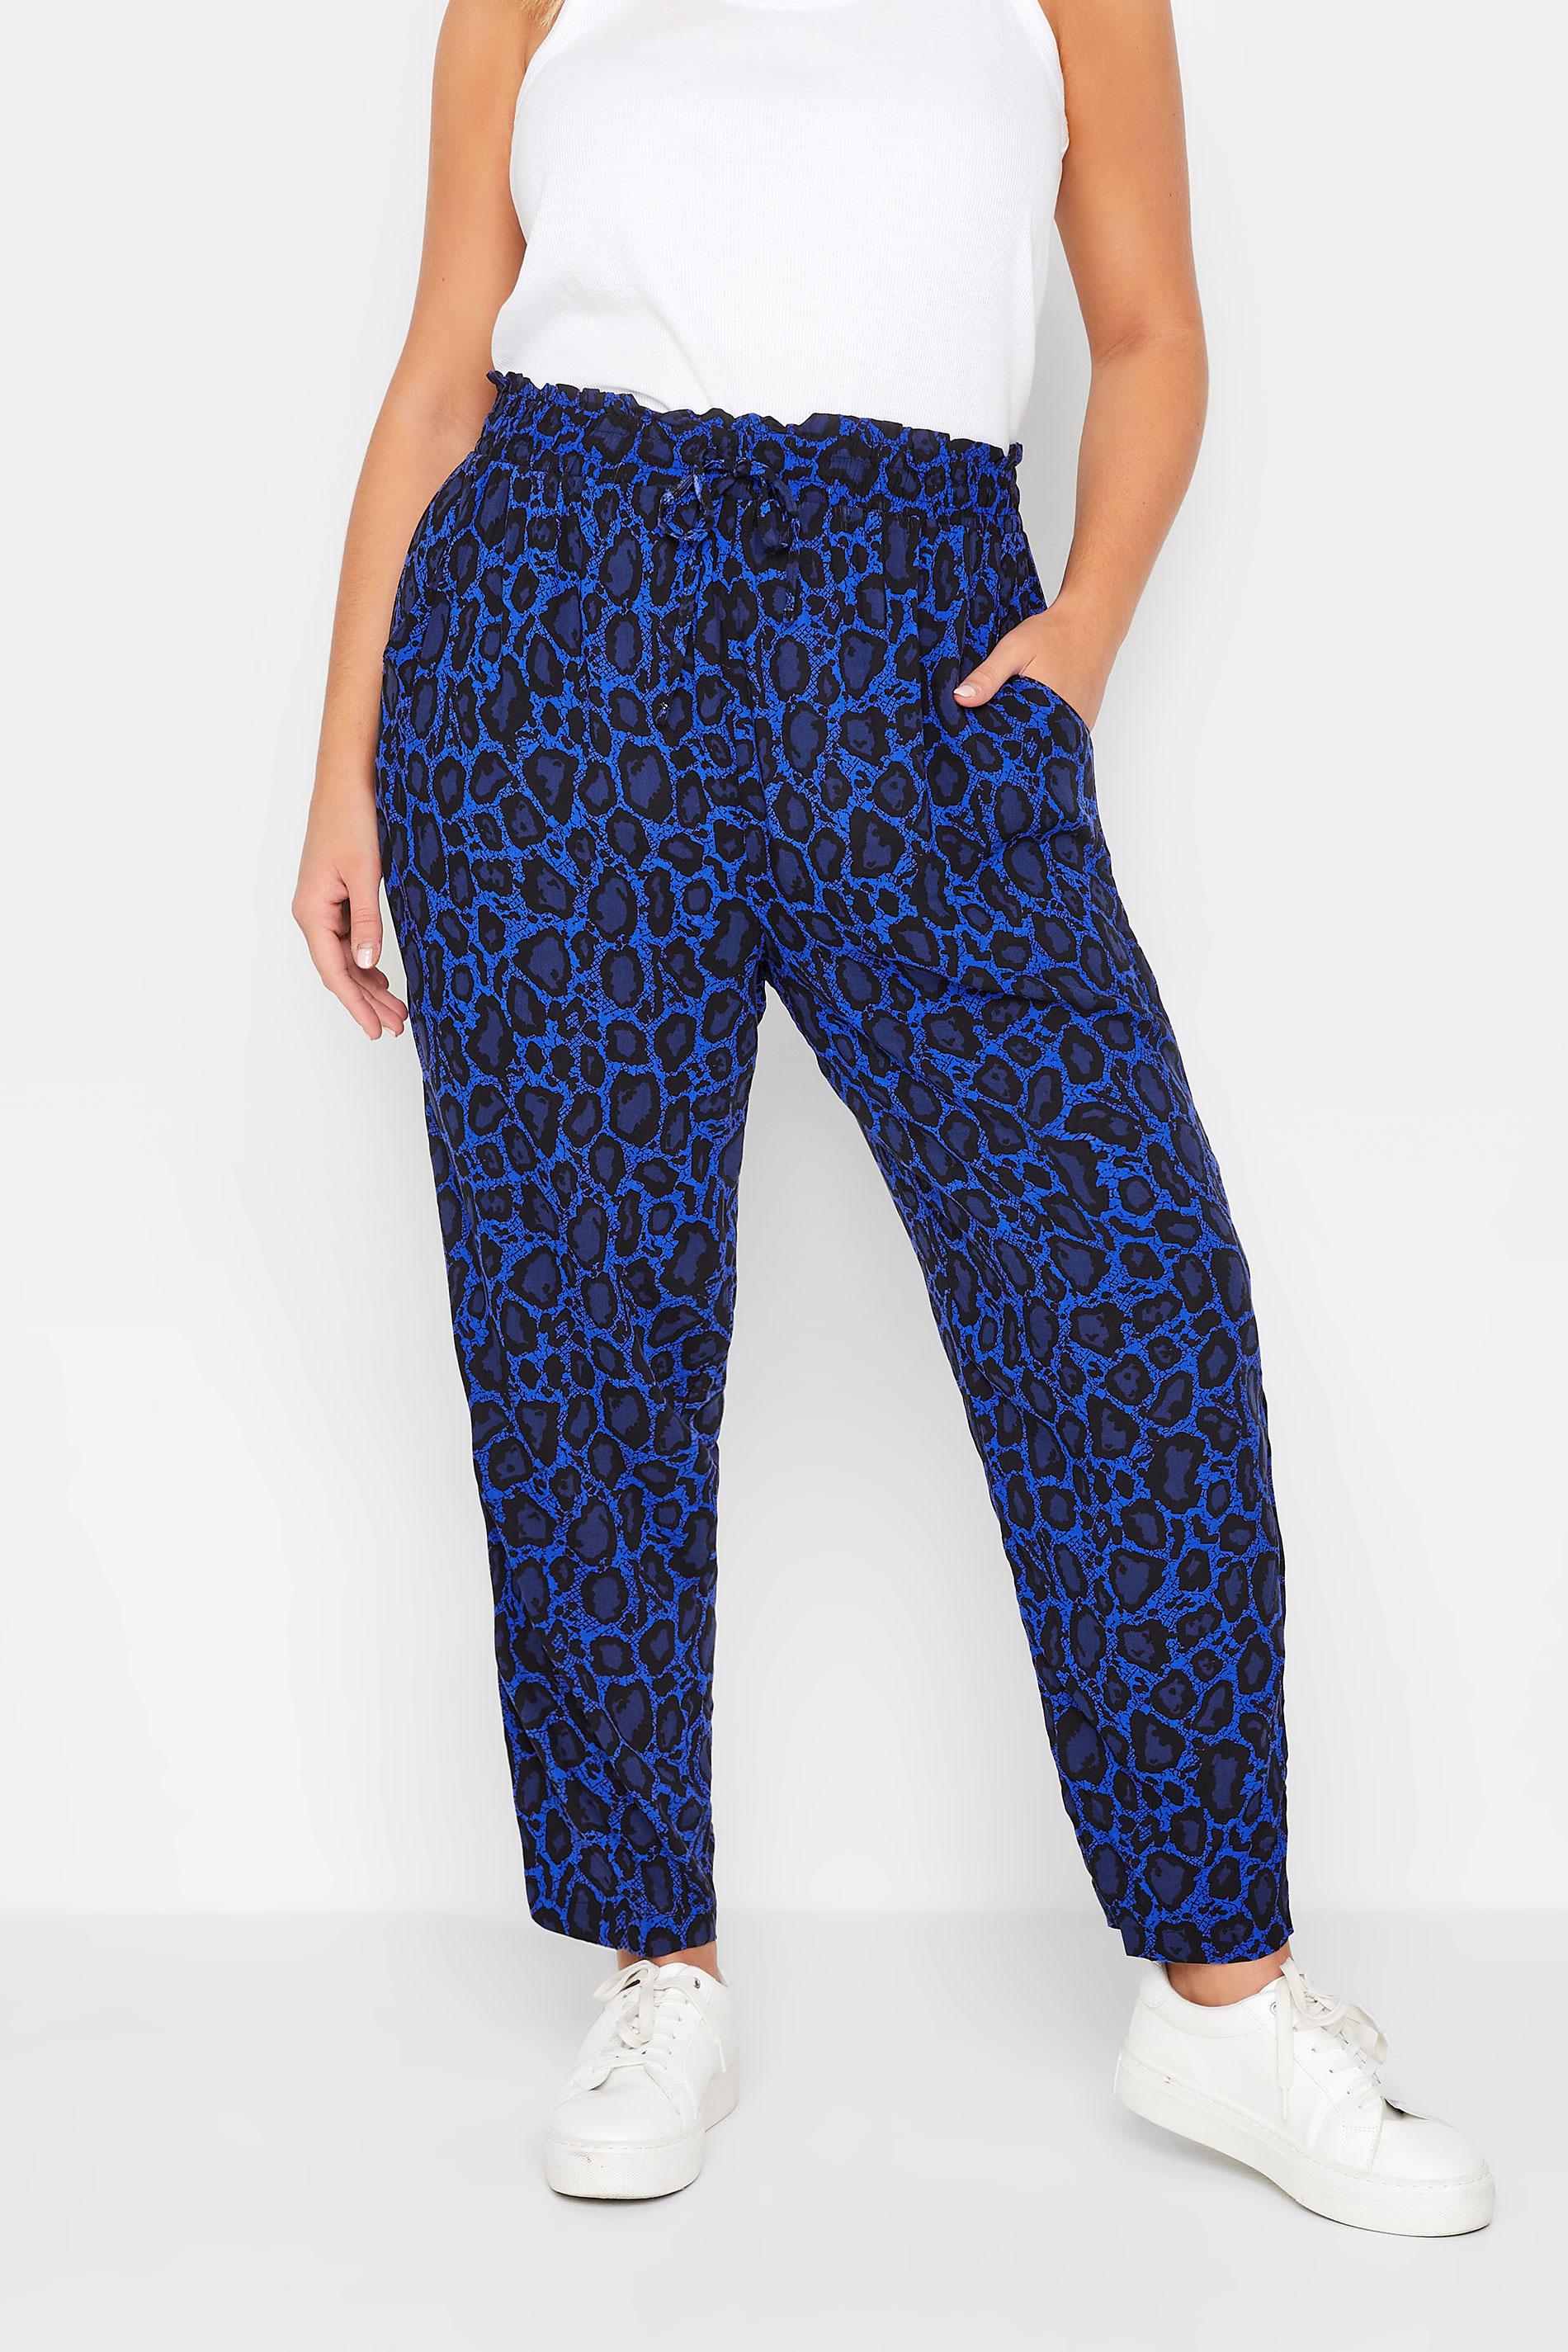 Plus Size Blue Leopard Printed Trousers | Yours Clothing  1